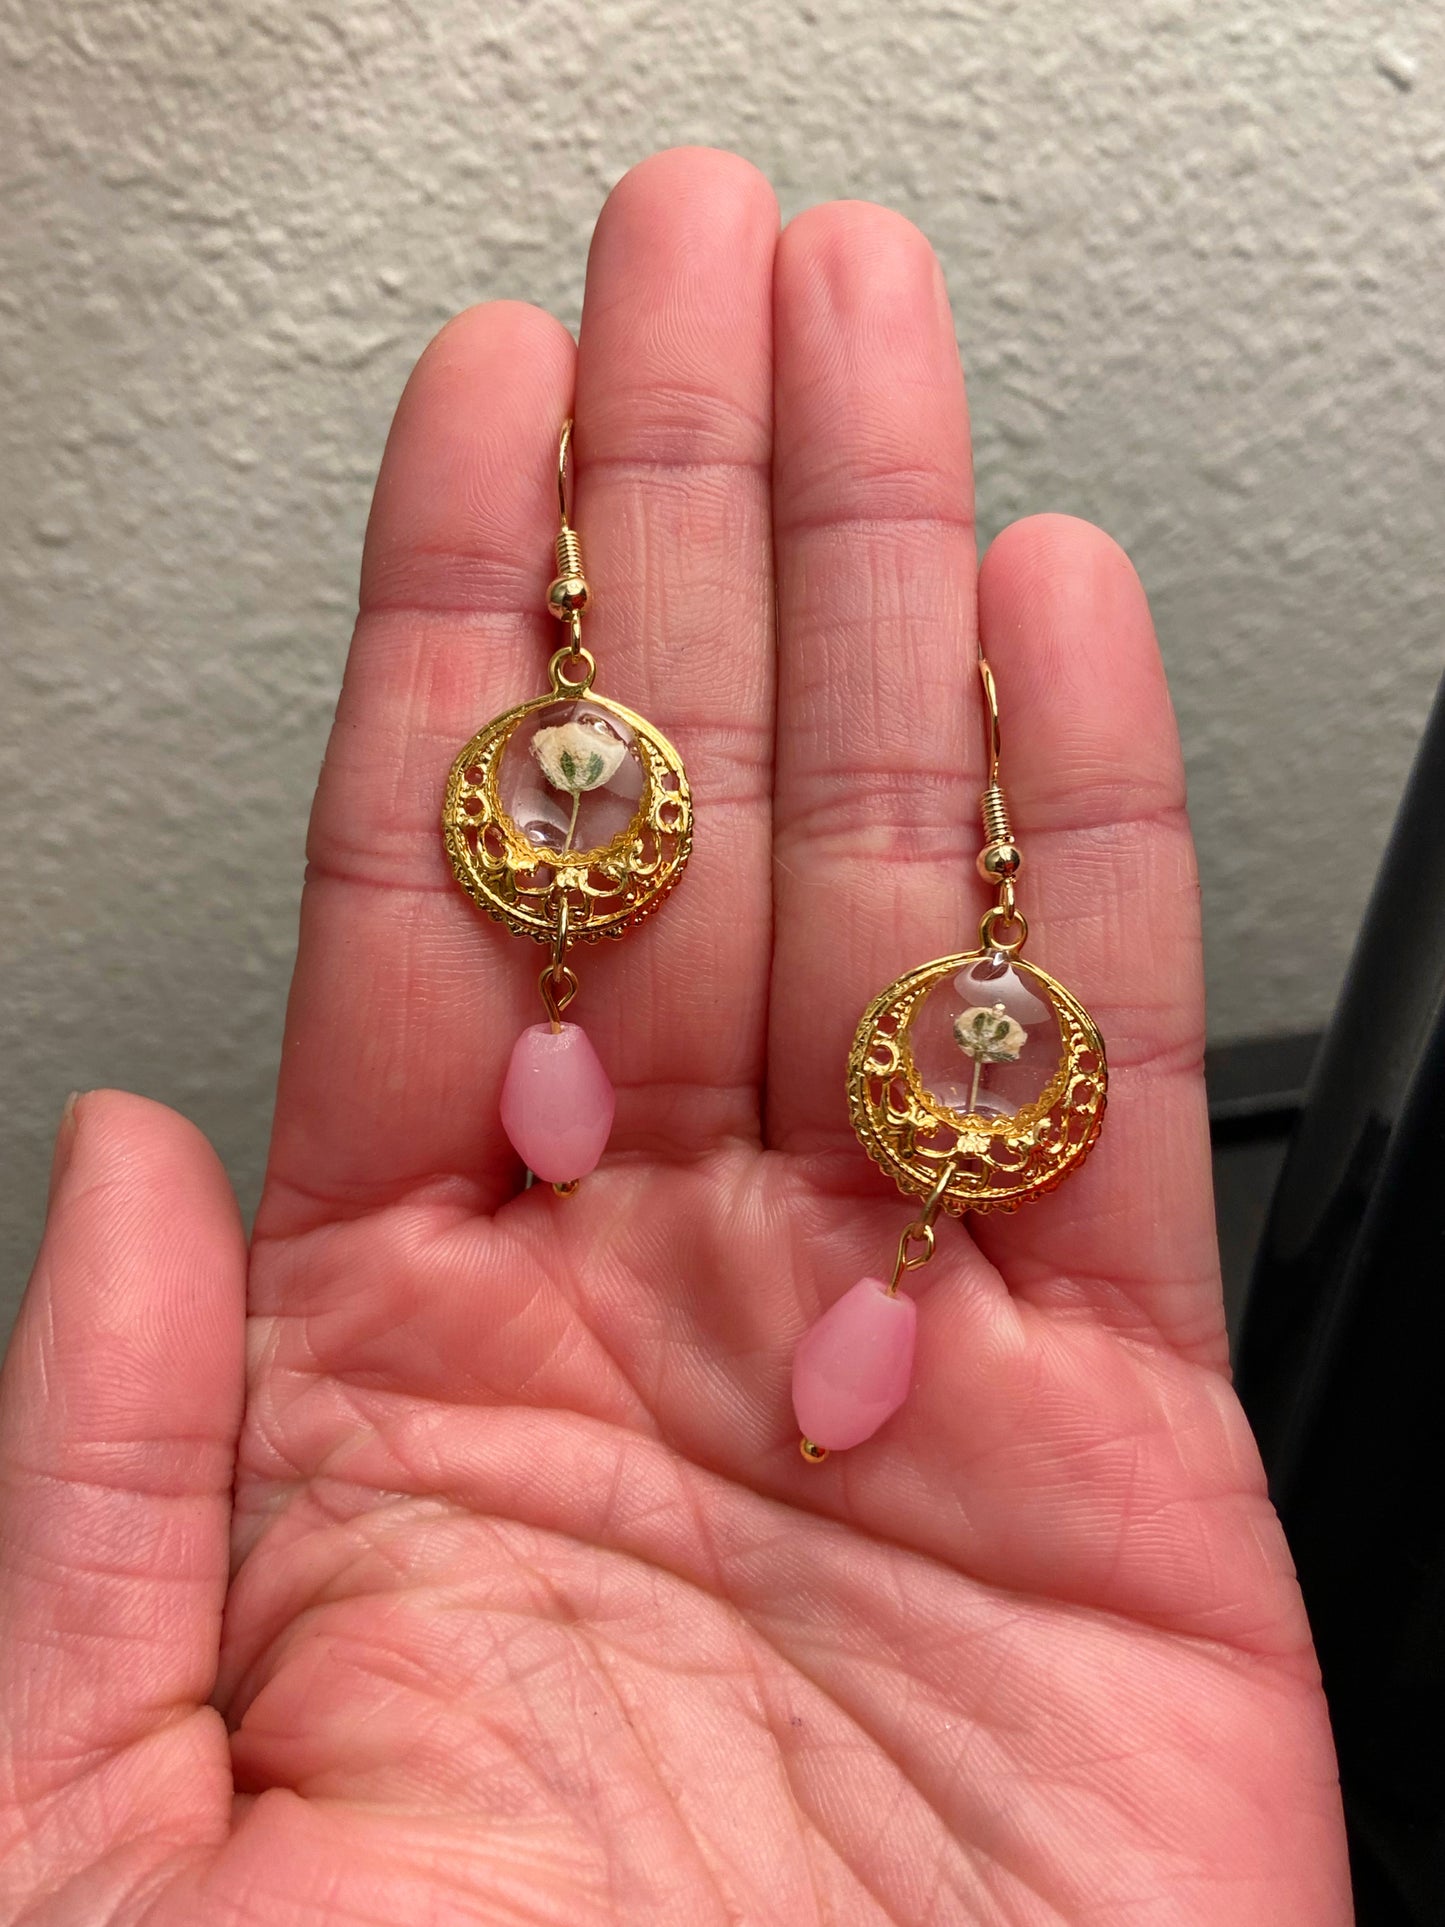 Baby's Breath - Vintage style open gold circle earrings with real pressed flowers and milky pink glass faceted bead dangle